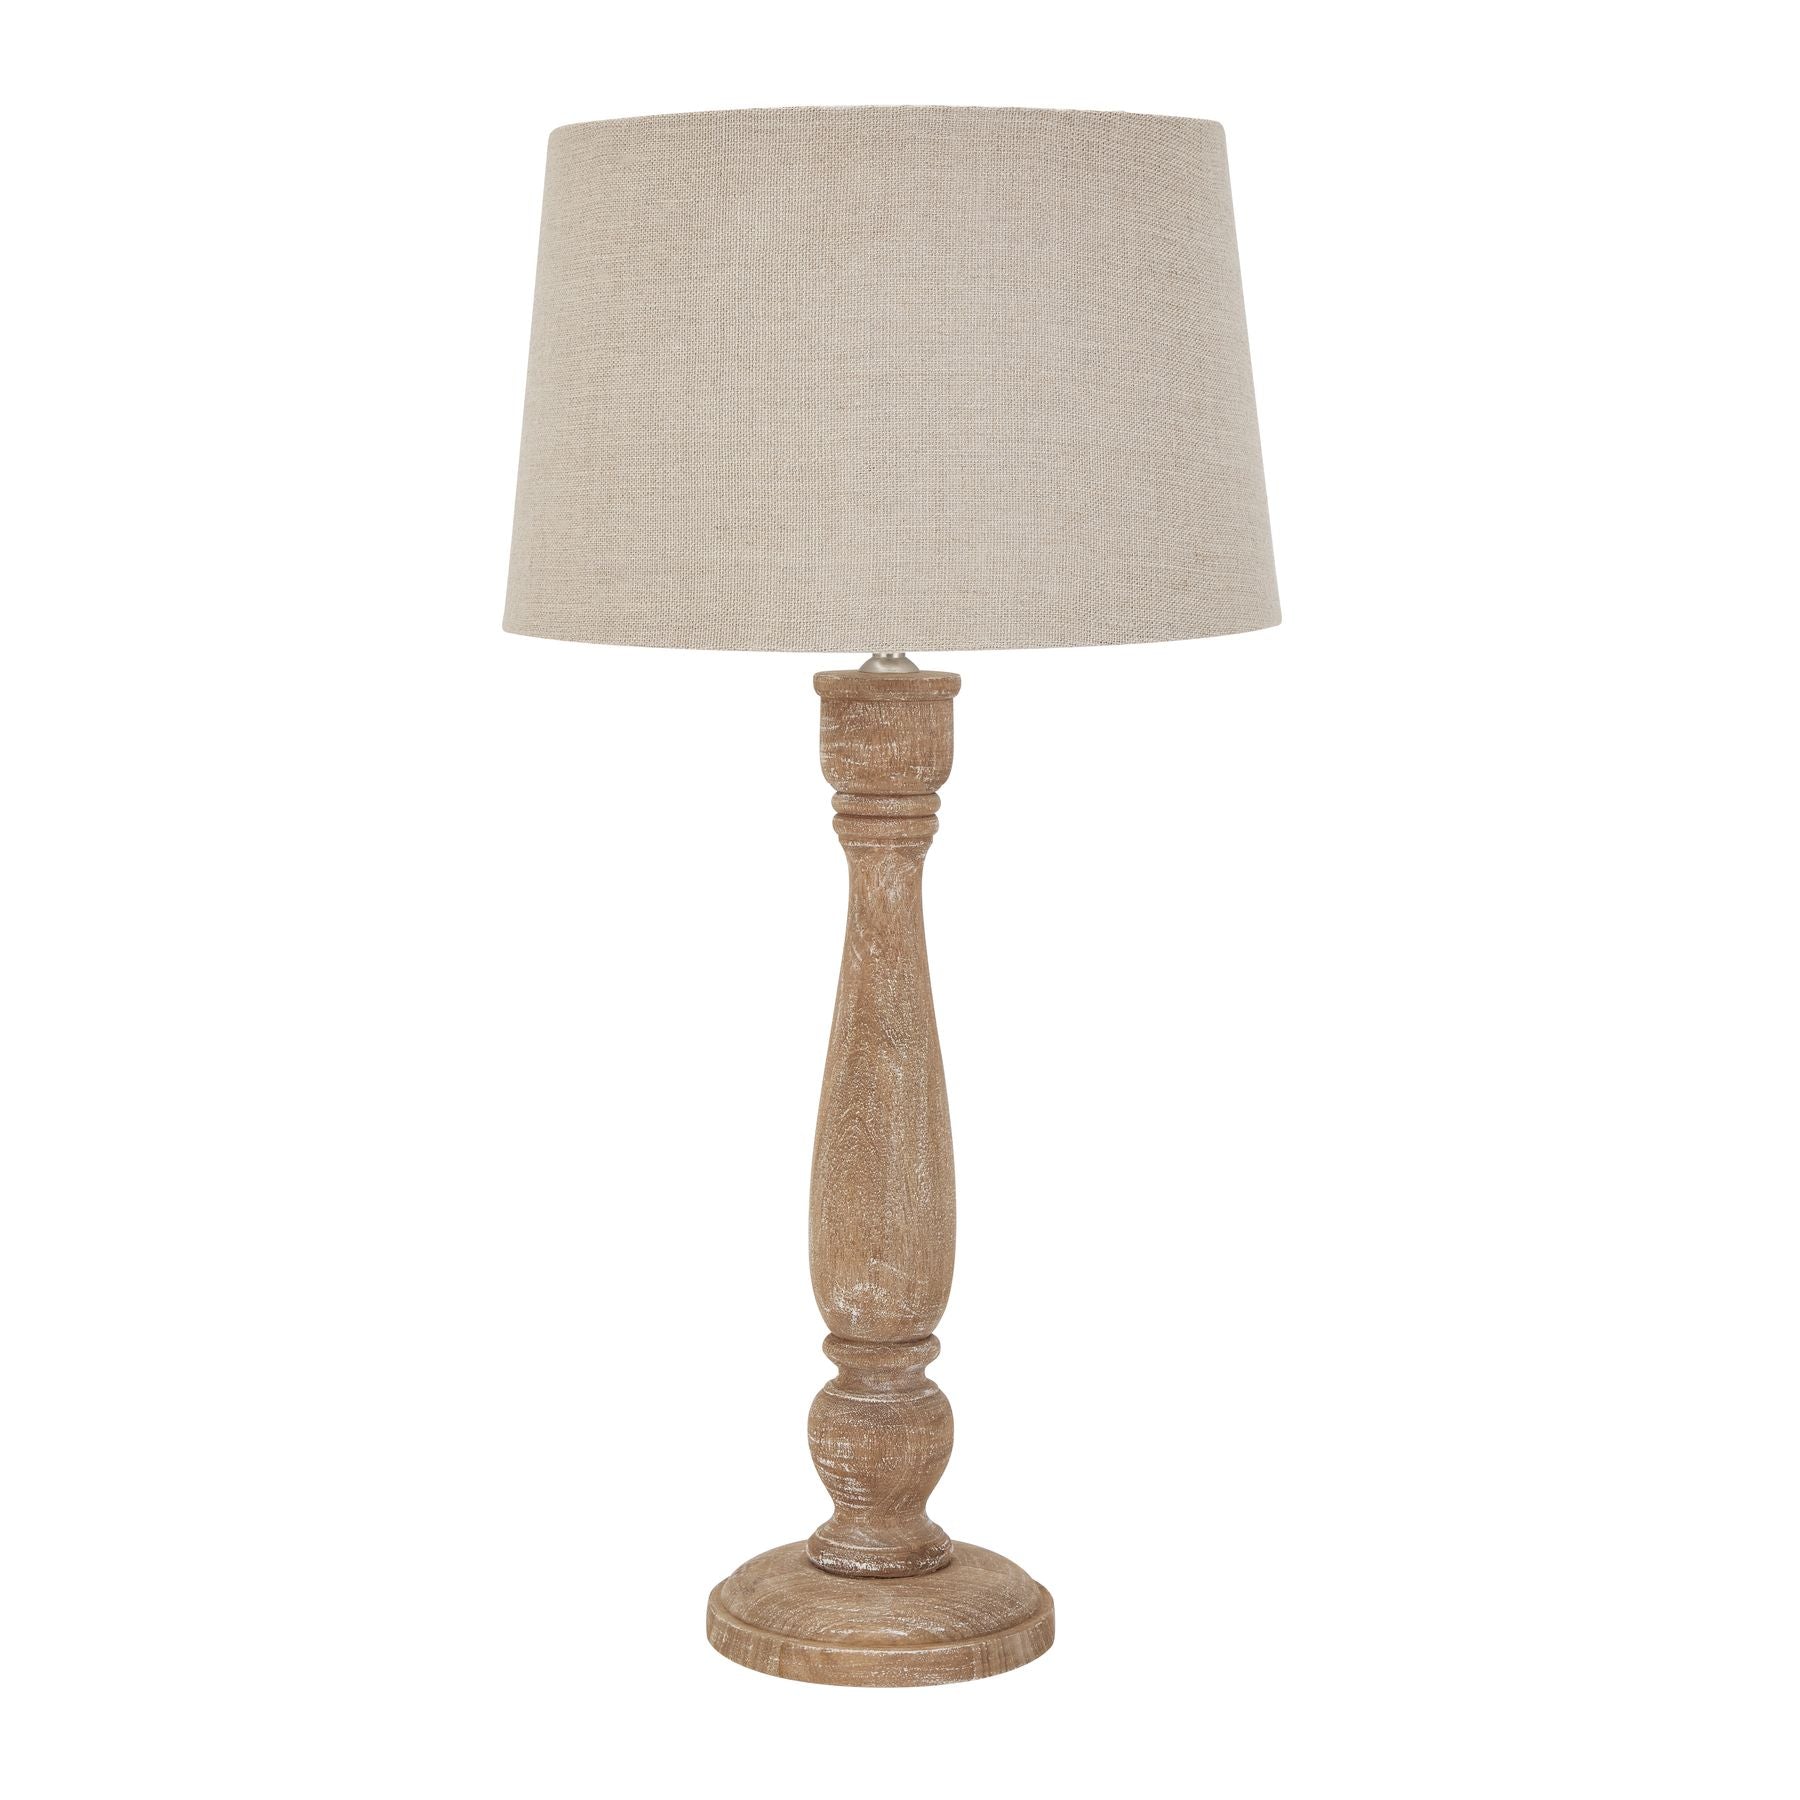 View Delaney Natural Wash Candlestick Lamp With Linen Shade information